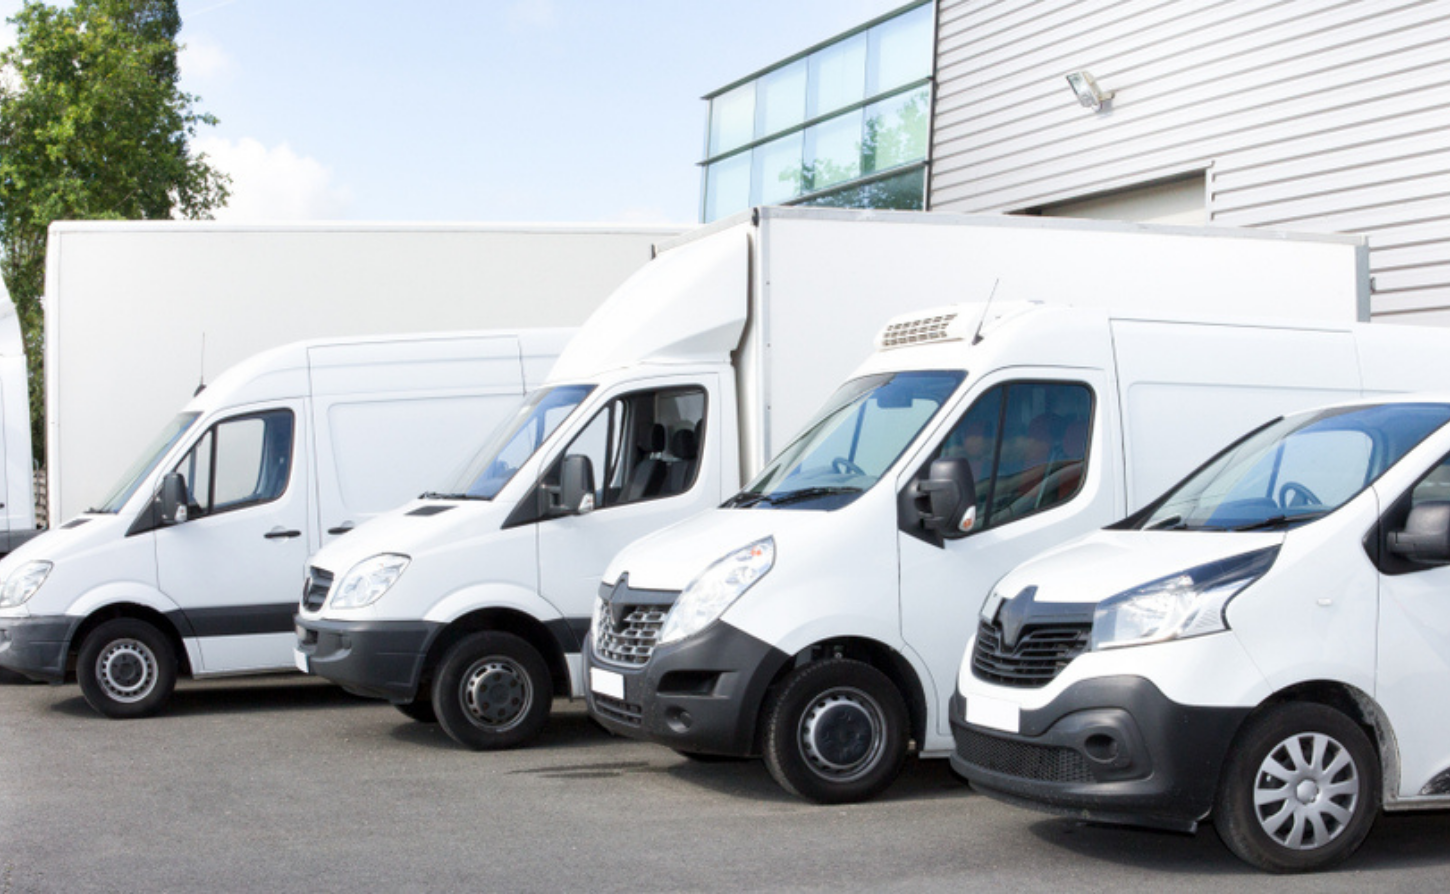 commercial vehicles lined up